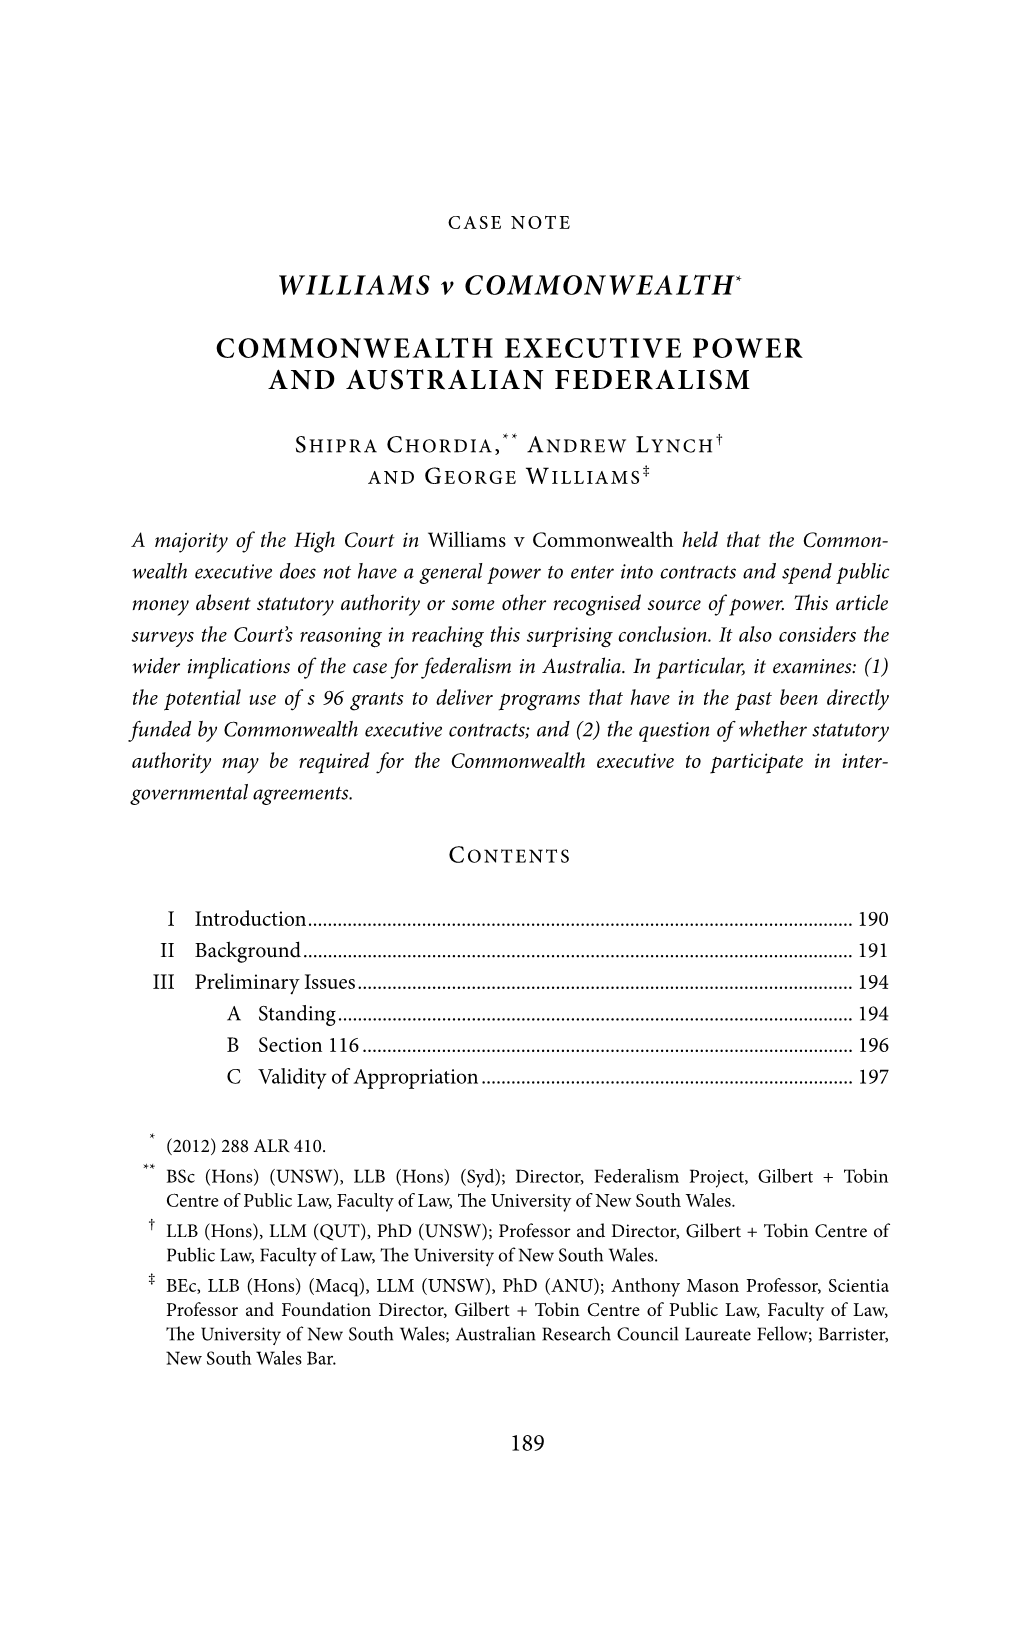 Williams V Commonwealth: Commonwealth Executive Power